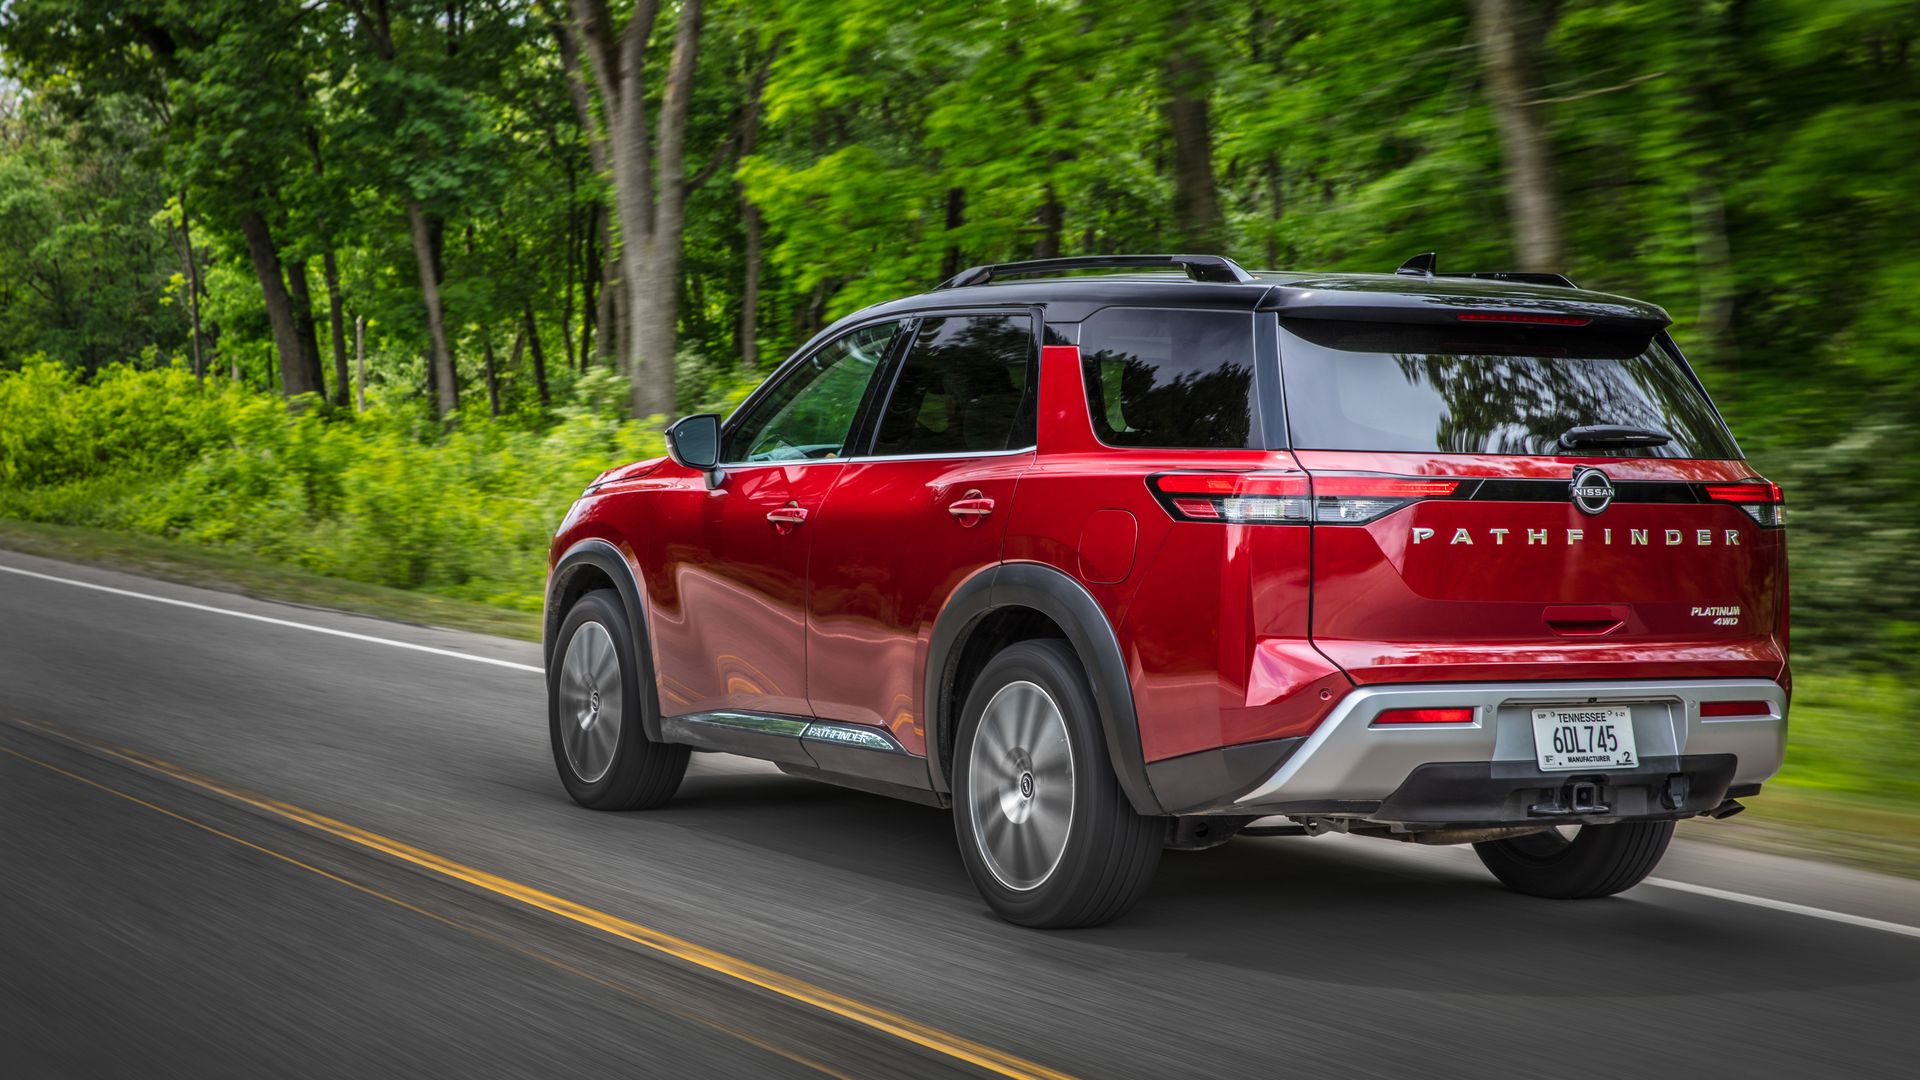 Image of red 2022 Nissan Pathfinder SUV on a country road